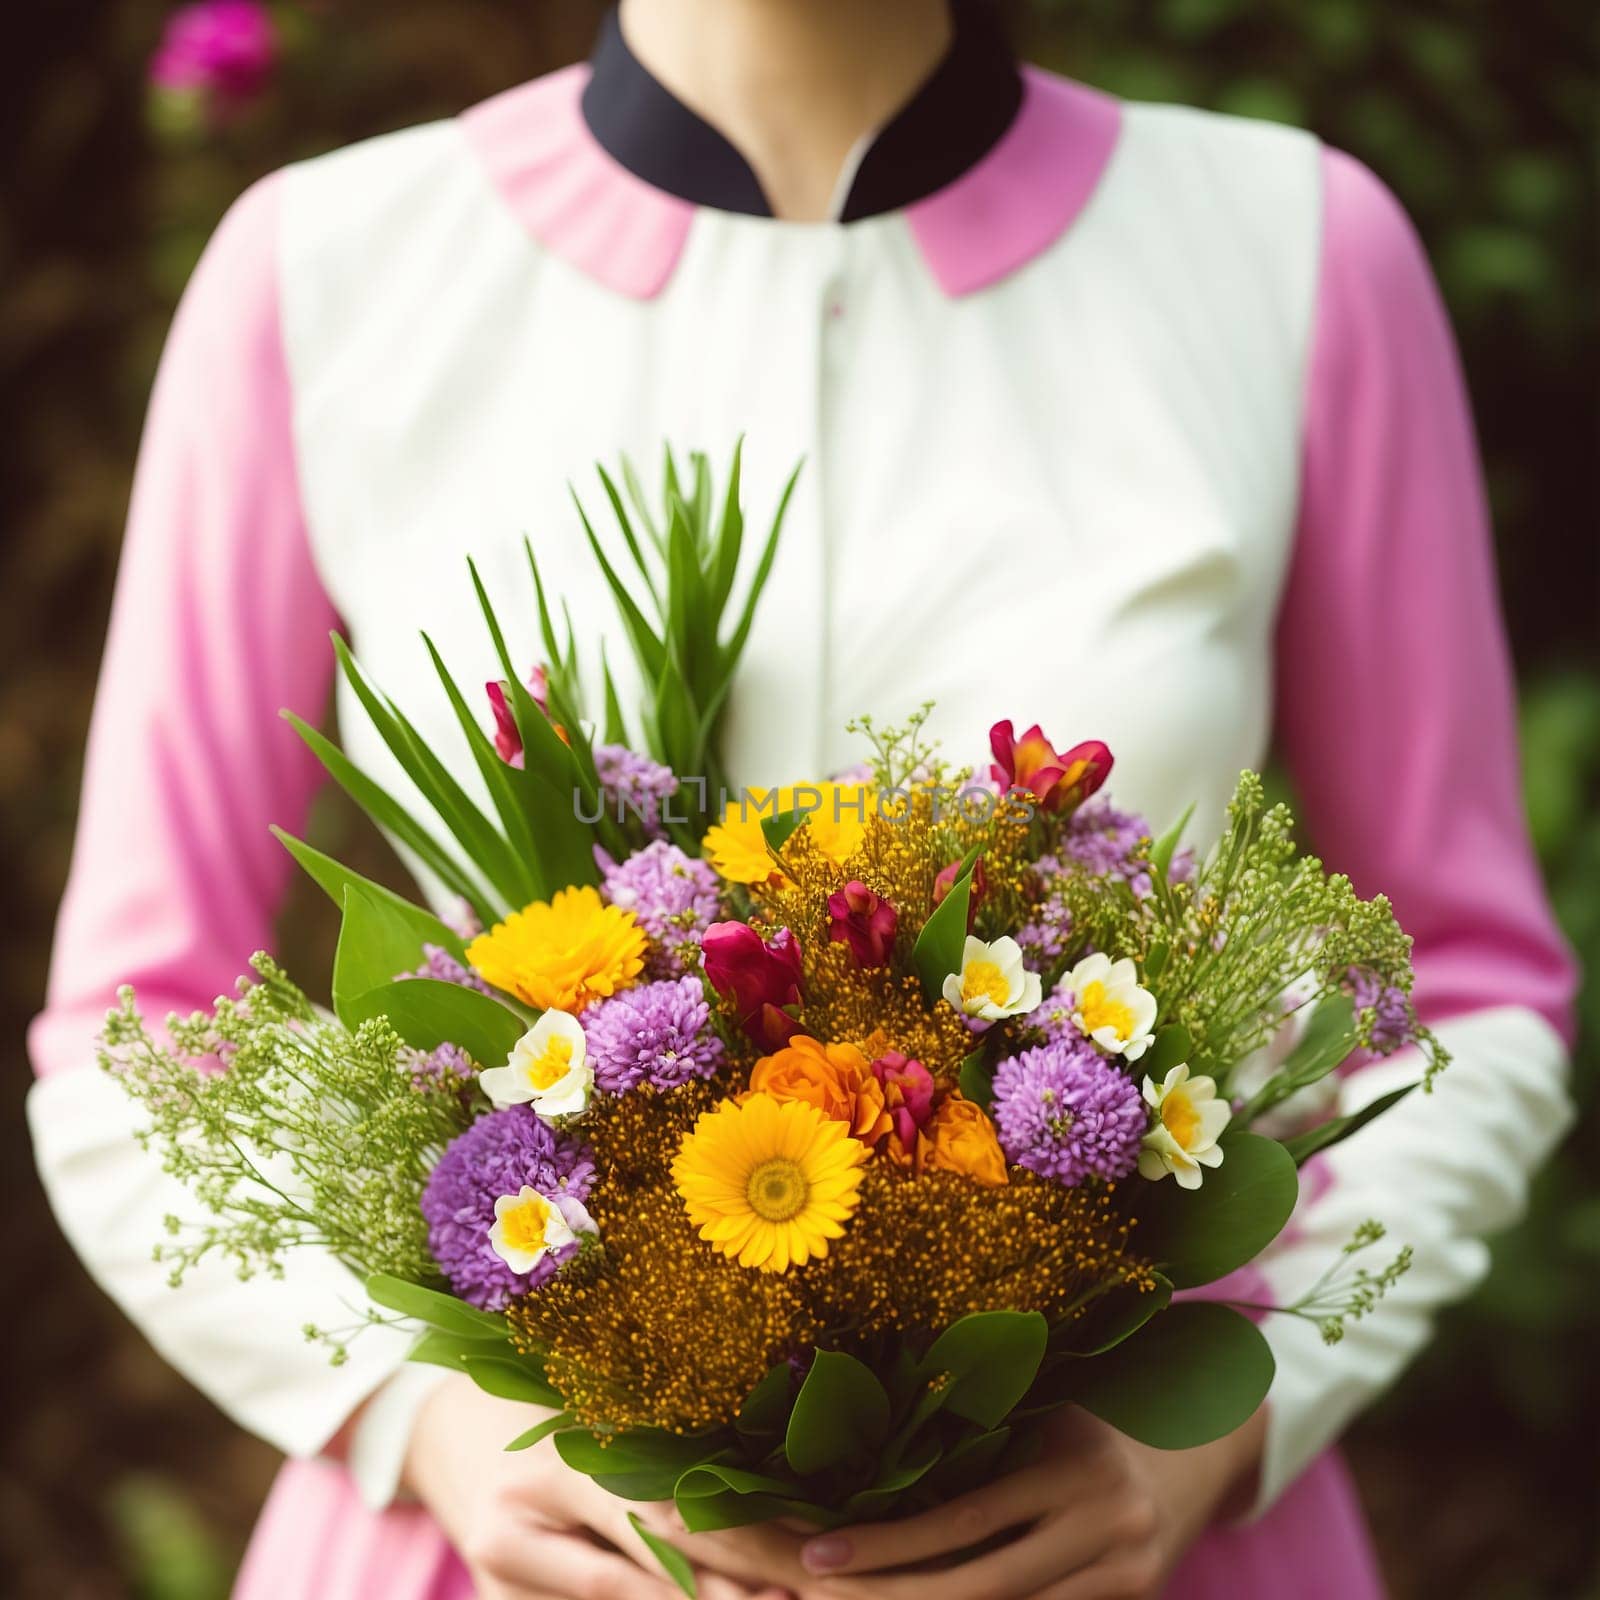 Woman with a colorful bouquet of flowers by macroarting